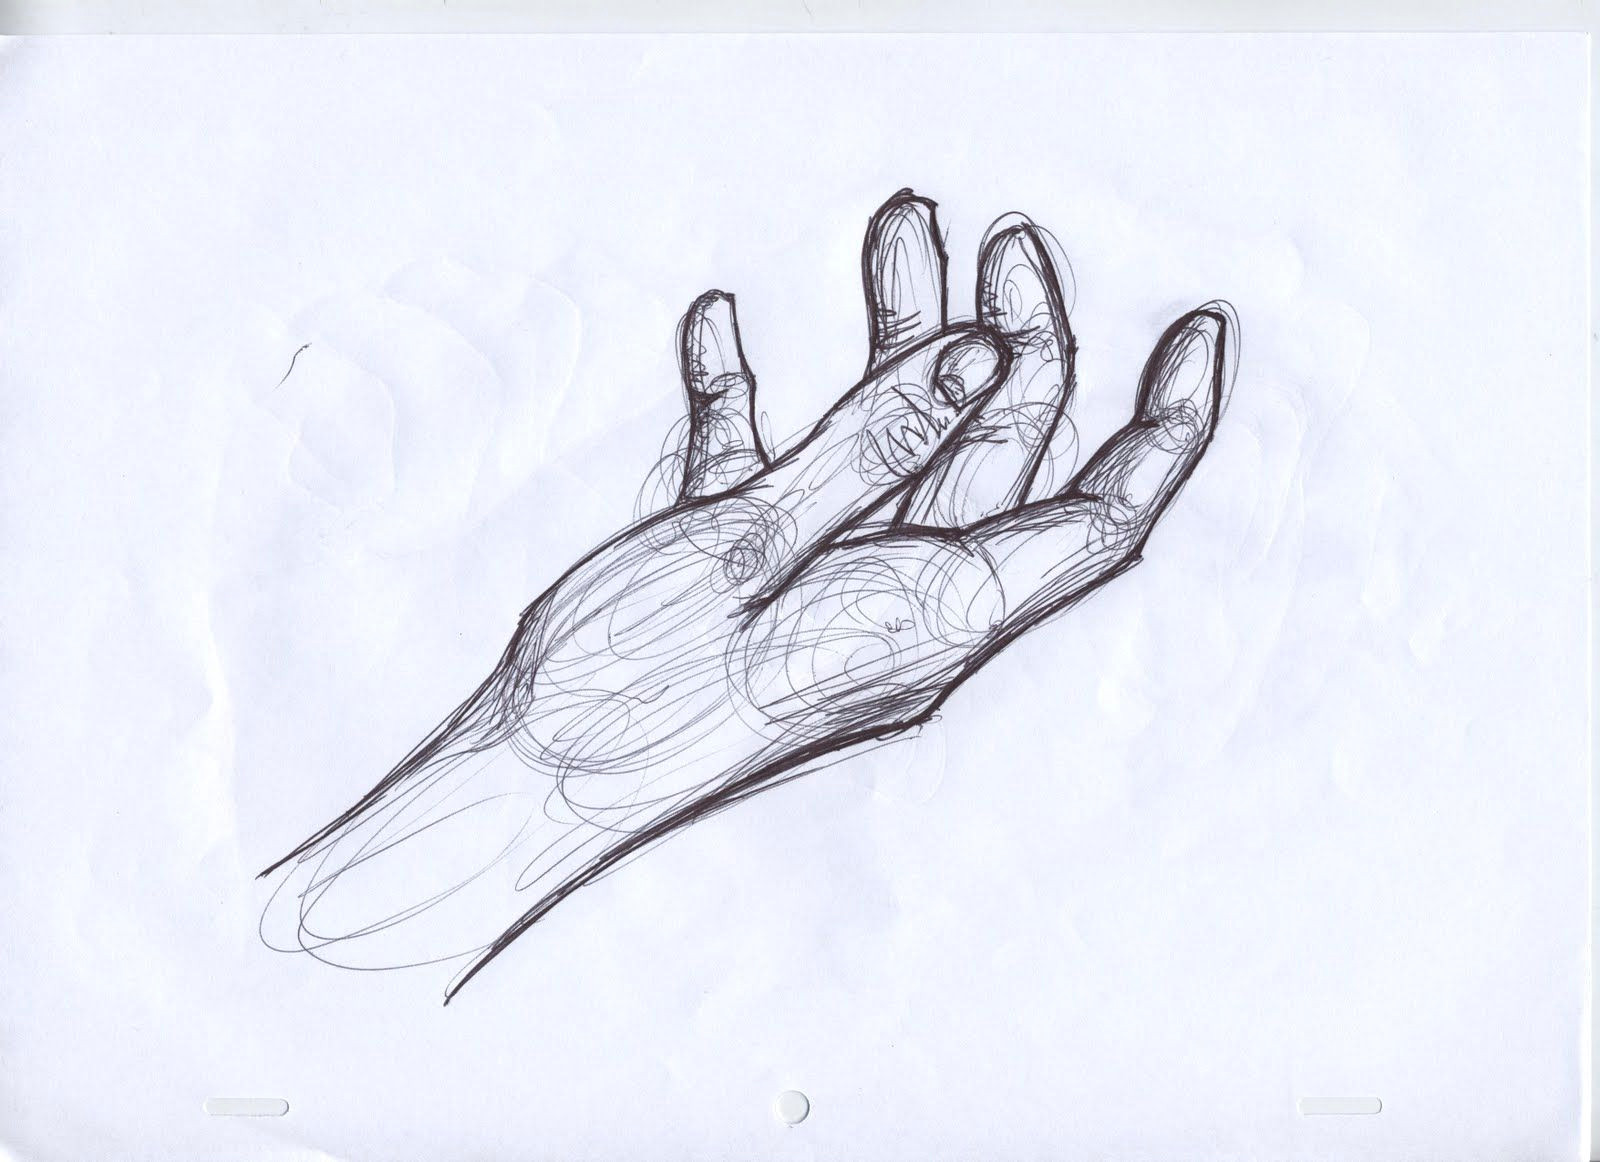 Drawings Of Hands Reaching for Each Other Reaching Hands Drawing Google Search Birds Drawings How to